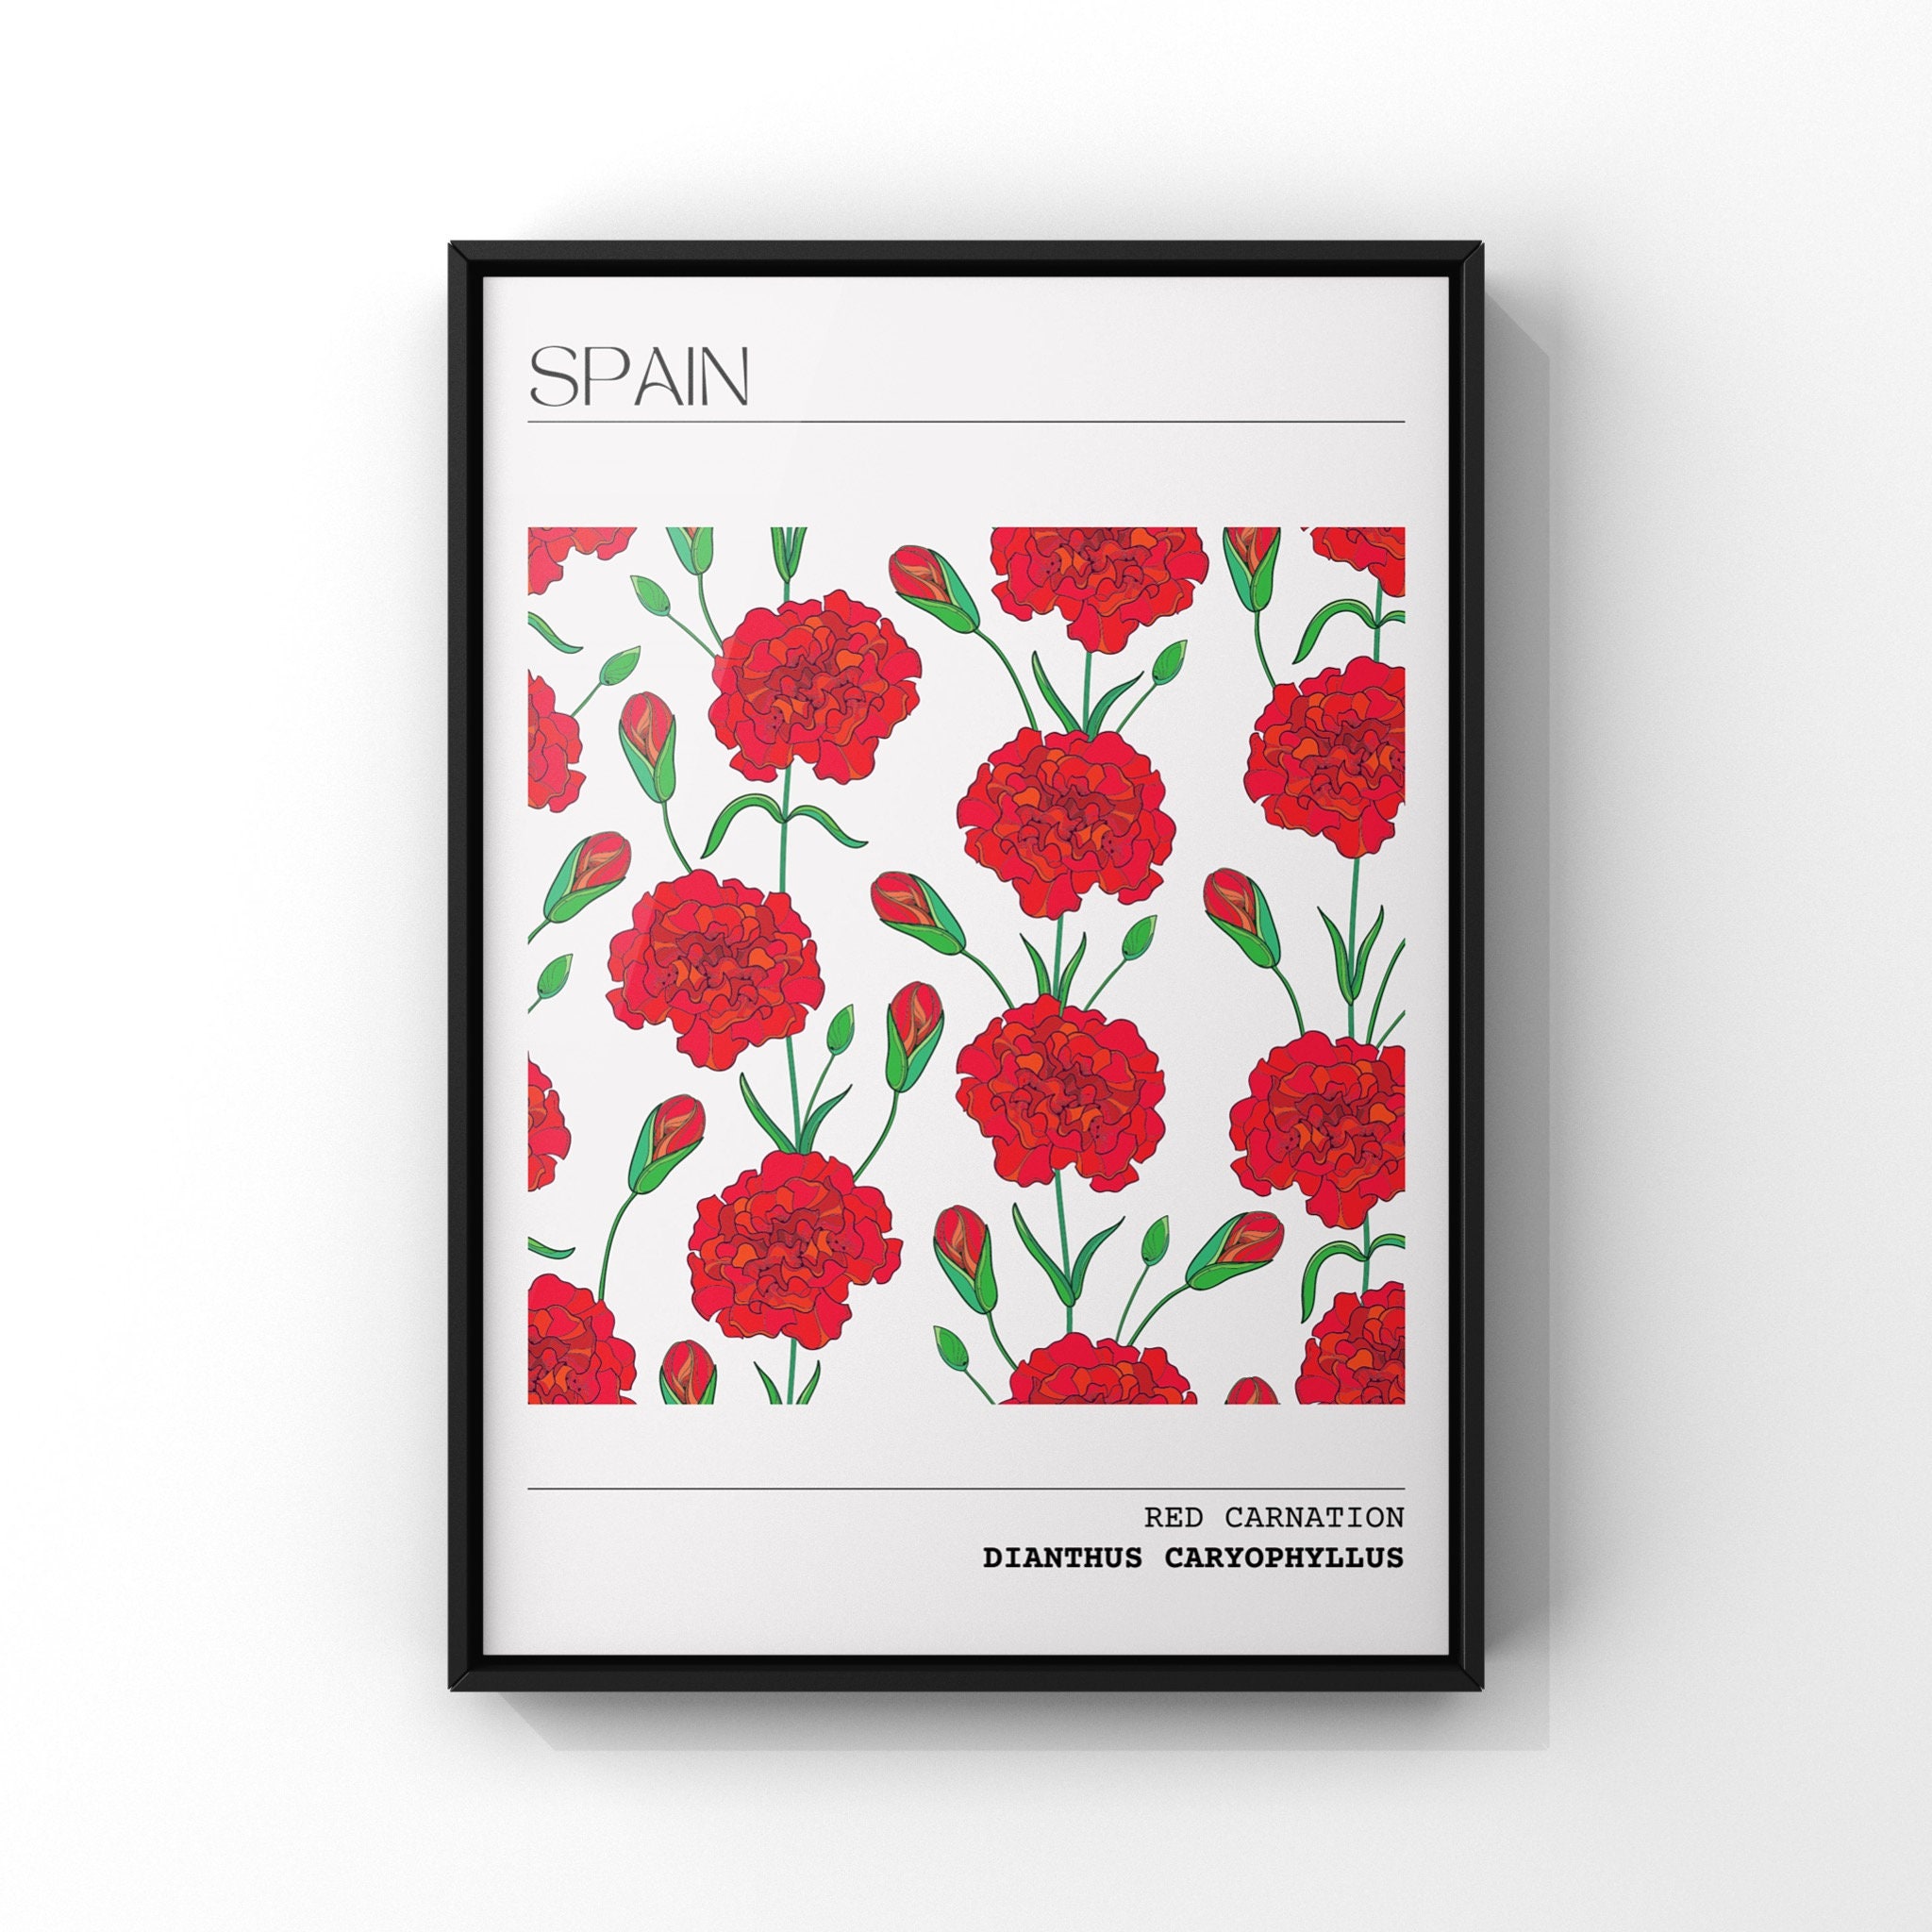 Buy Flowers of the World Travel Print Spain Red Carnation Online in India Etsy